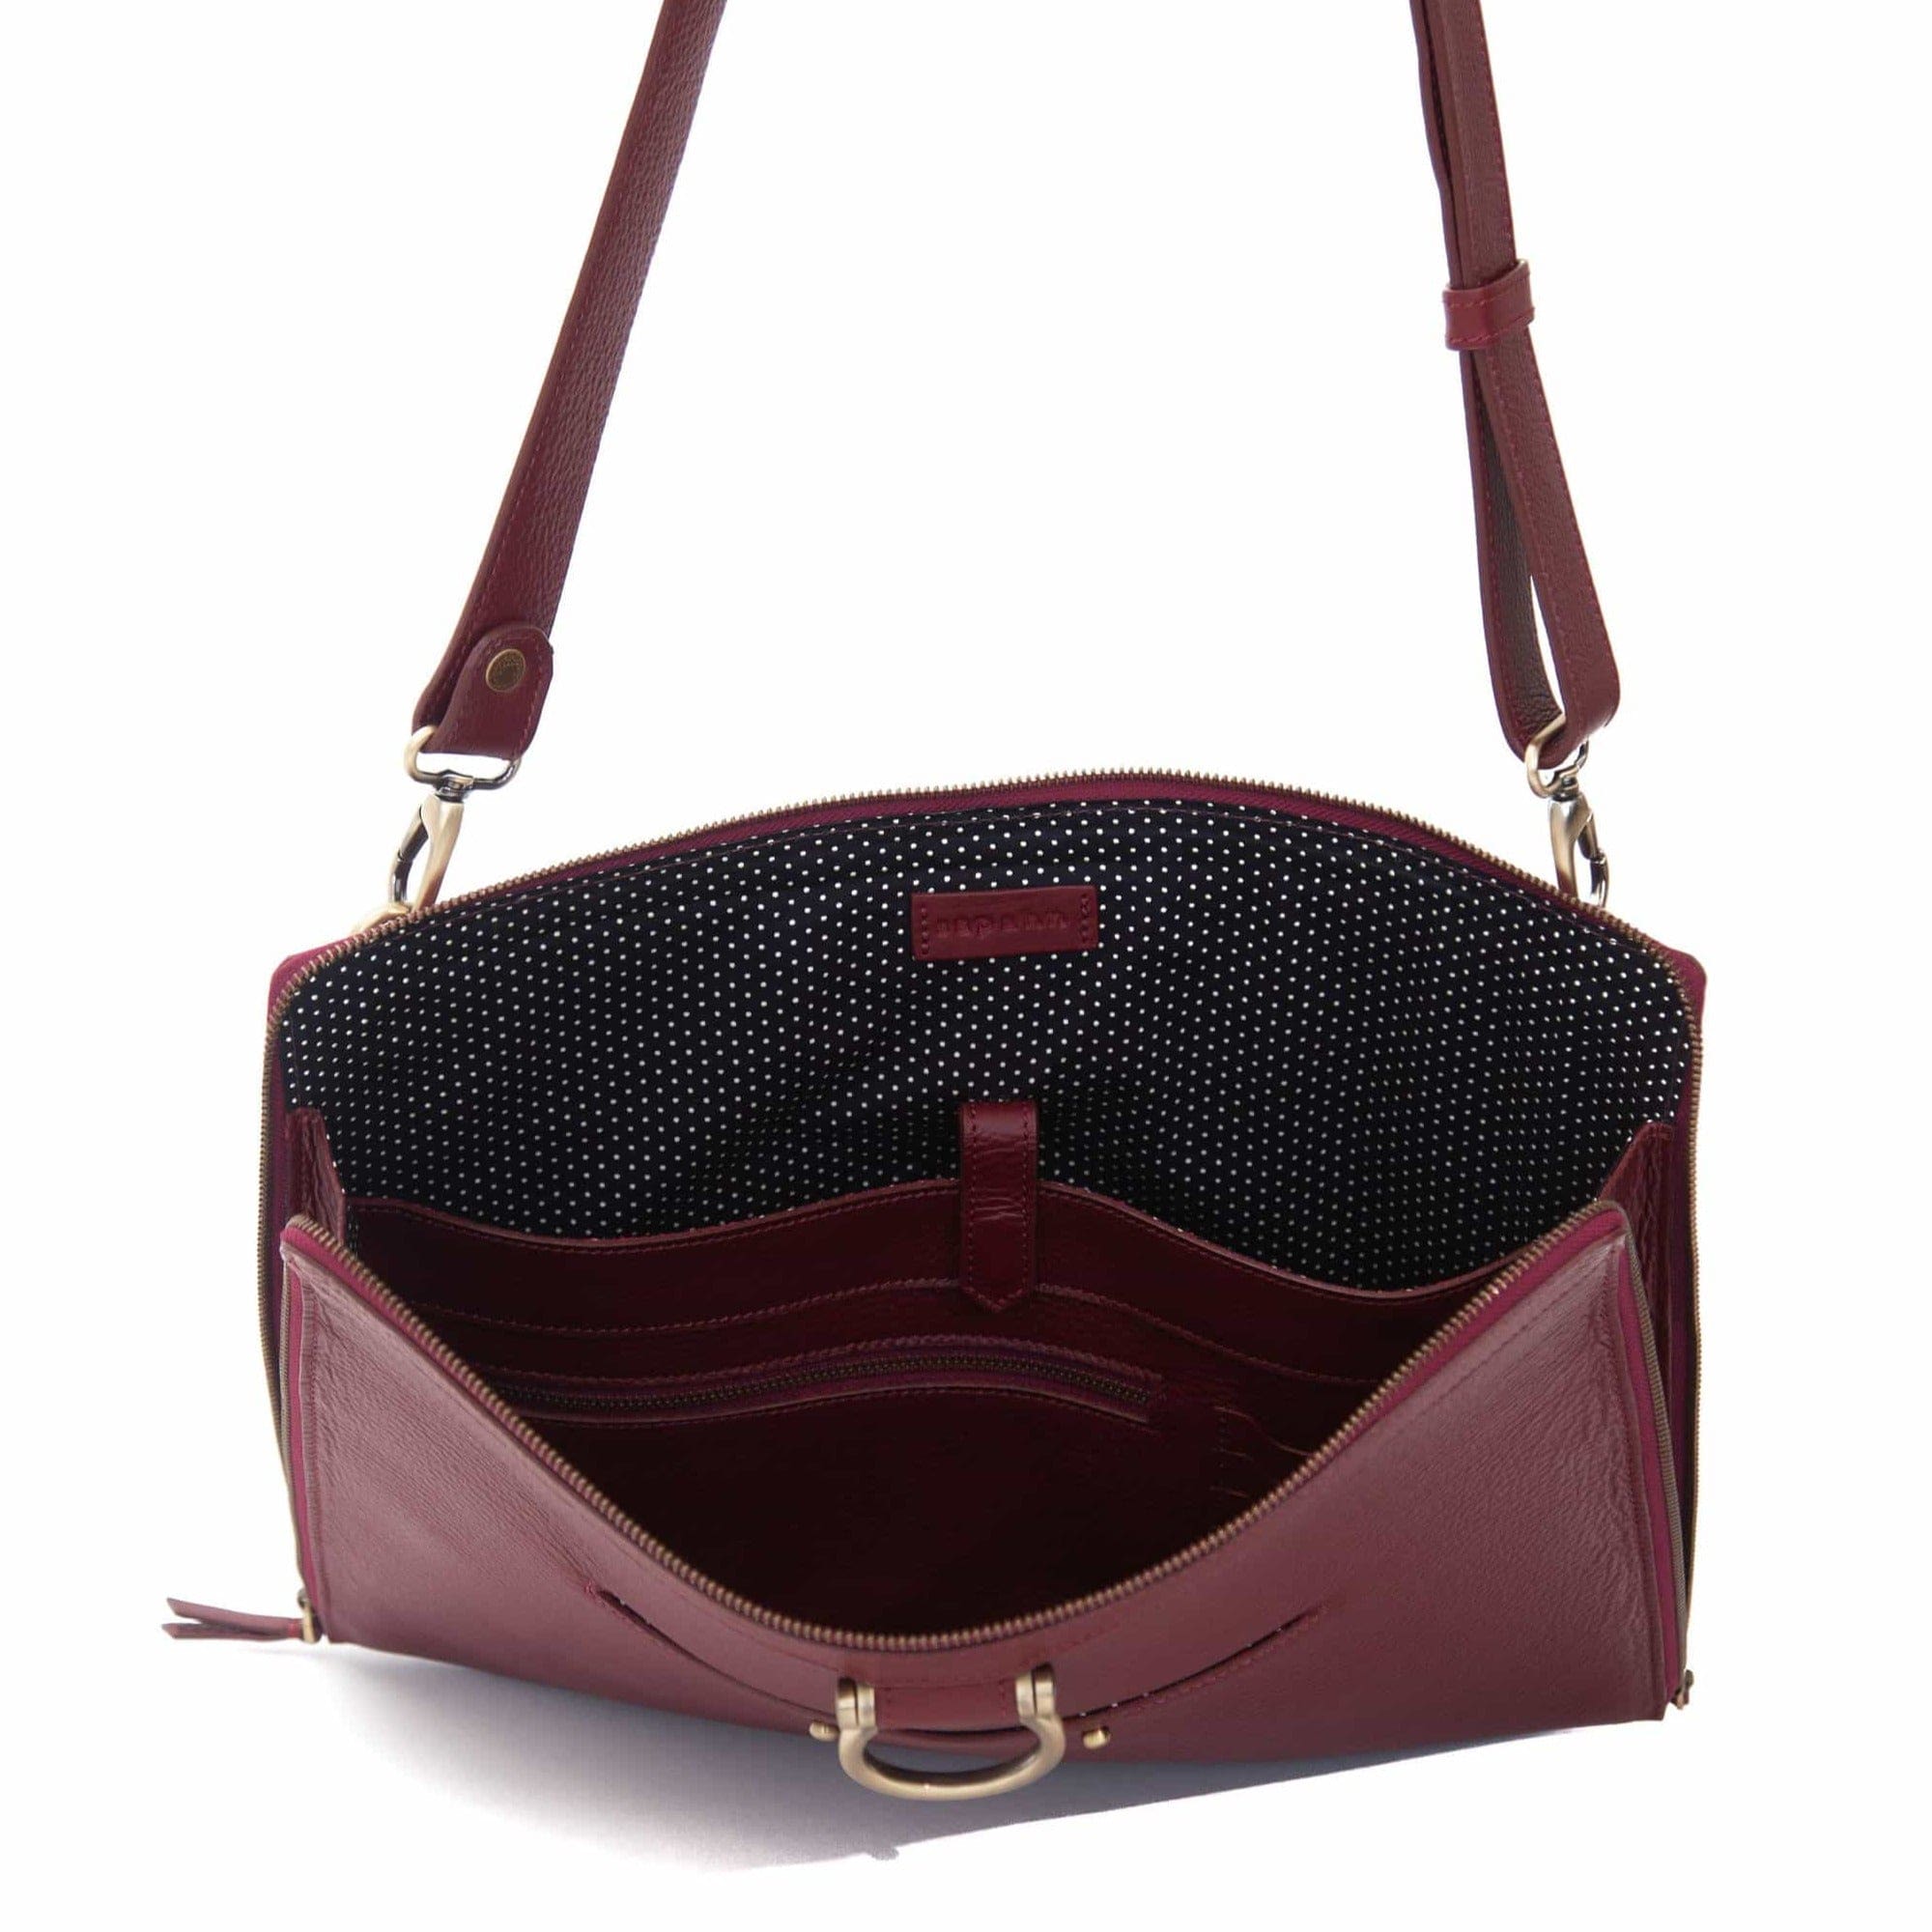 The M large crossbody bag in deep red oil leather will hold your 13” laptop in a scratch-resistant interior sleeve.